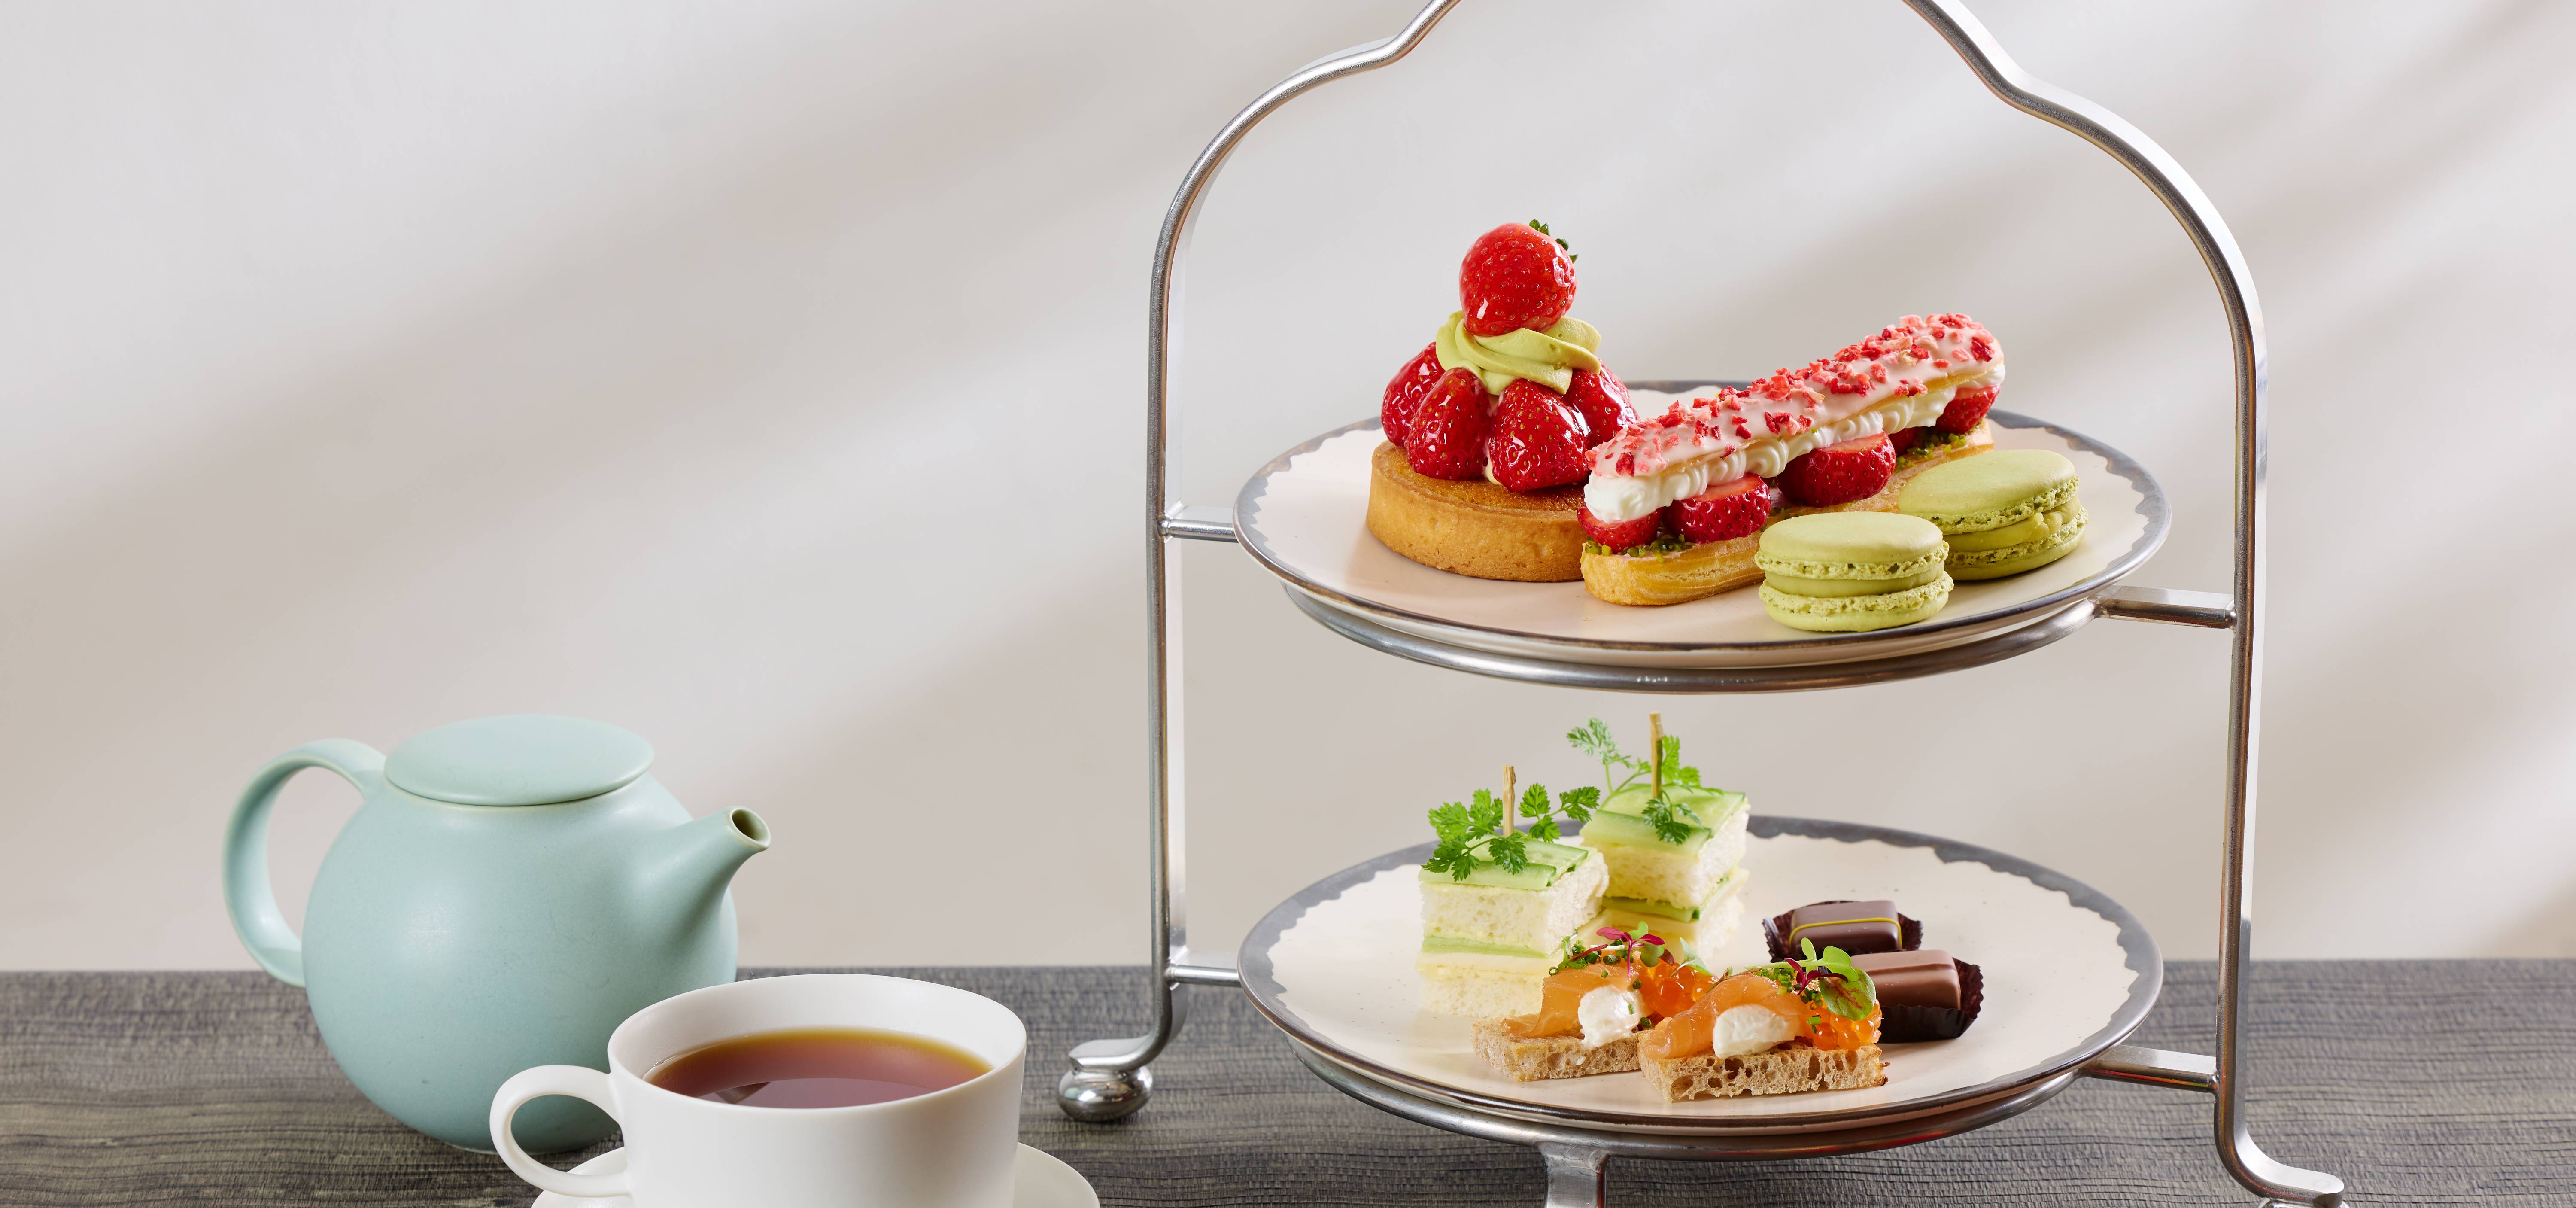 Pastry Shop 'Petit Afternoon Tea'